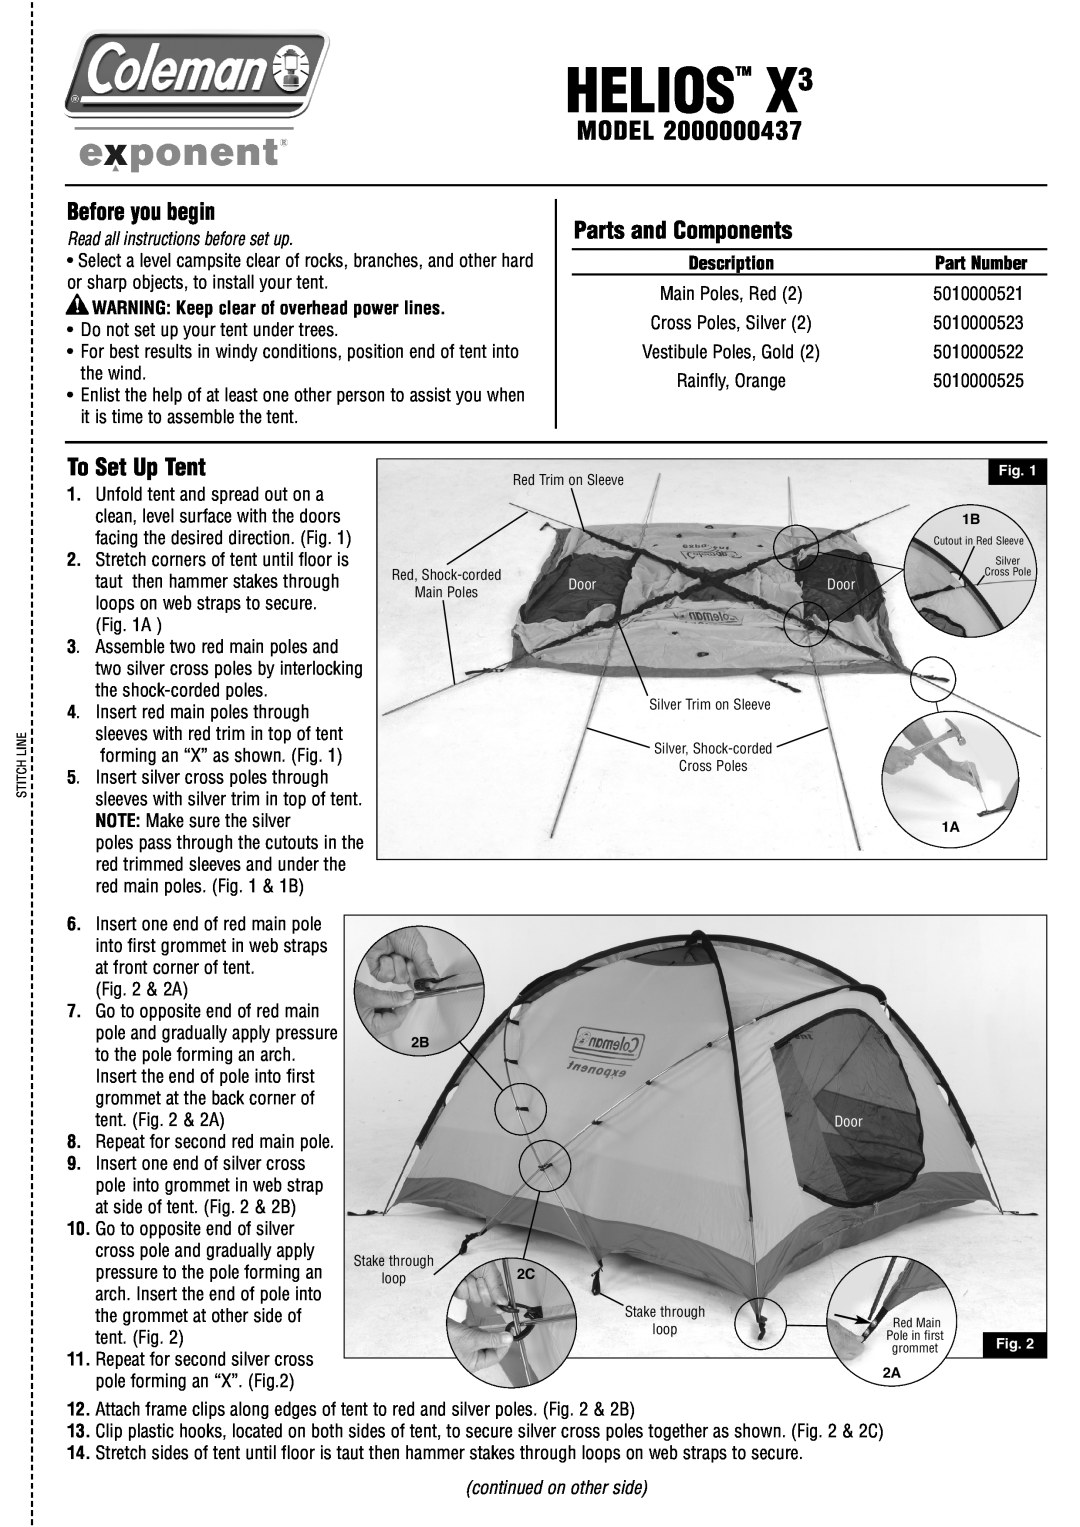 Coleman 2000000437 manual Before you begin, Parts and Components, To Set Up Tent, Part Number, Heliostm, Model 